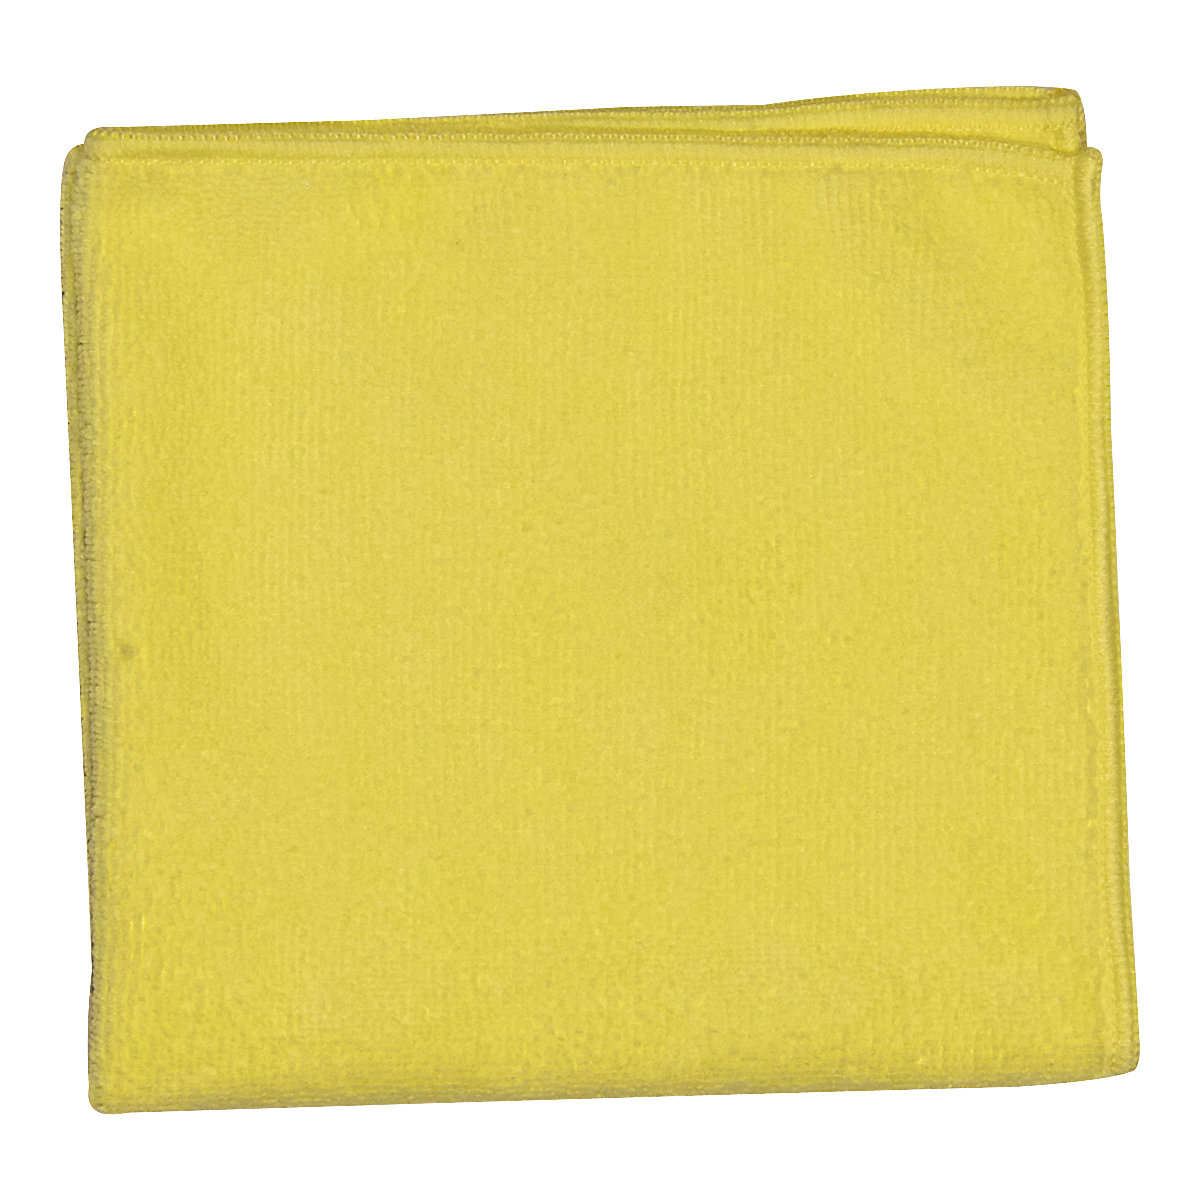 Rainbow Pro microfibre cloth, pack of 5, yellow-3